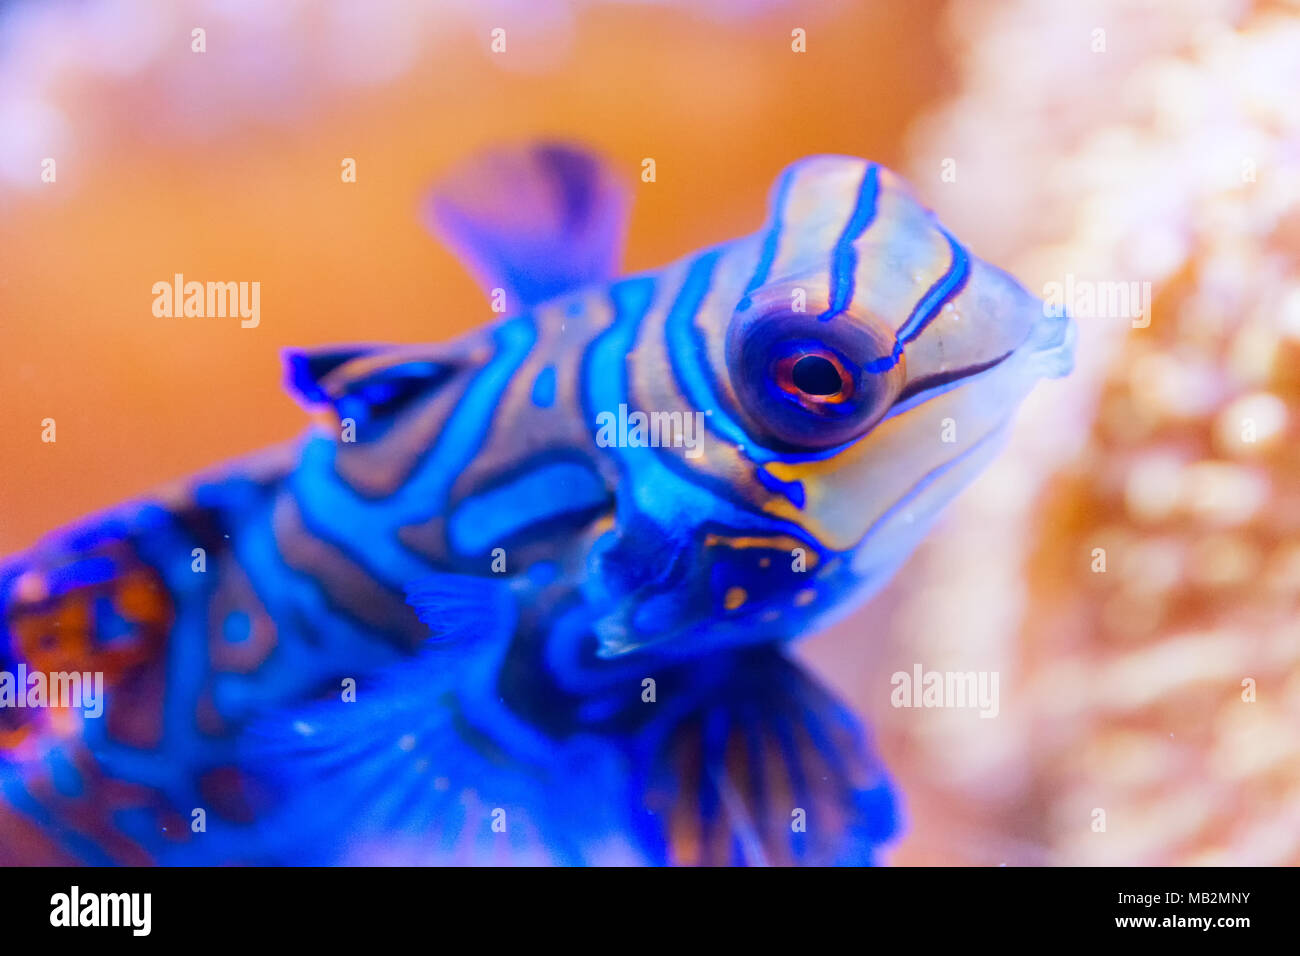 Blue Mandarin fish in Coral at the Philippines very colourfull, close-up Stock Photo